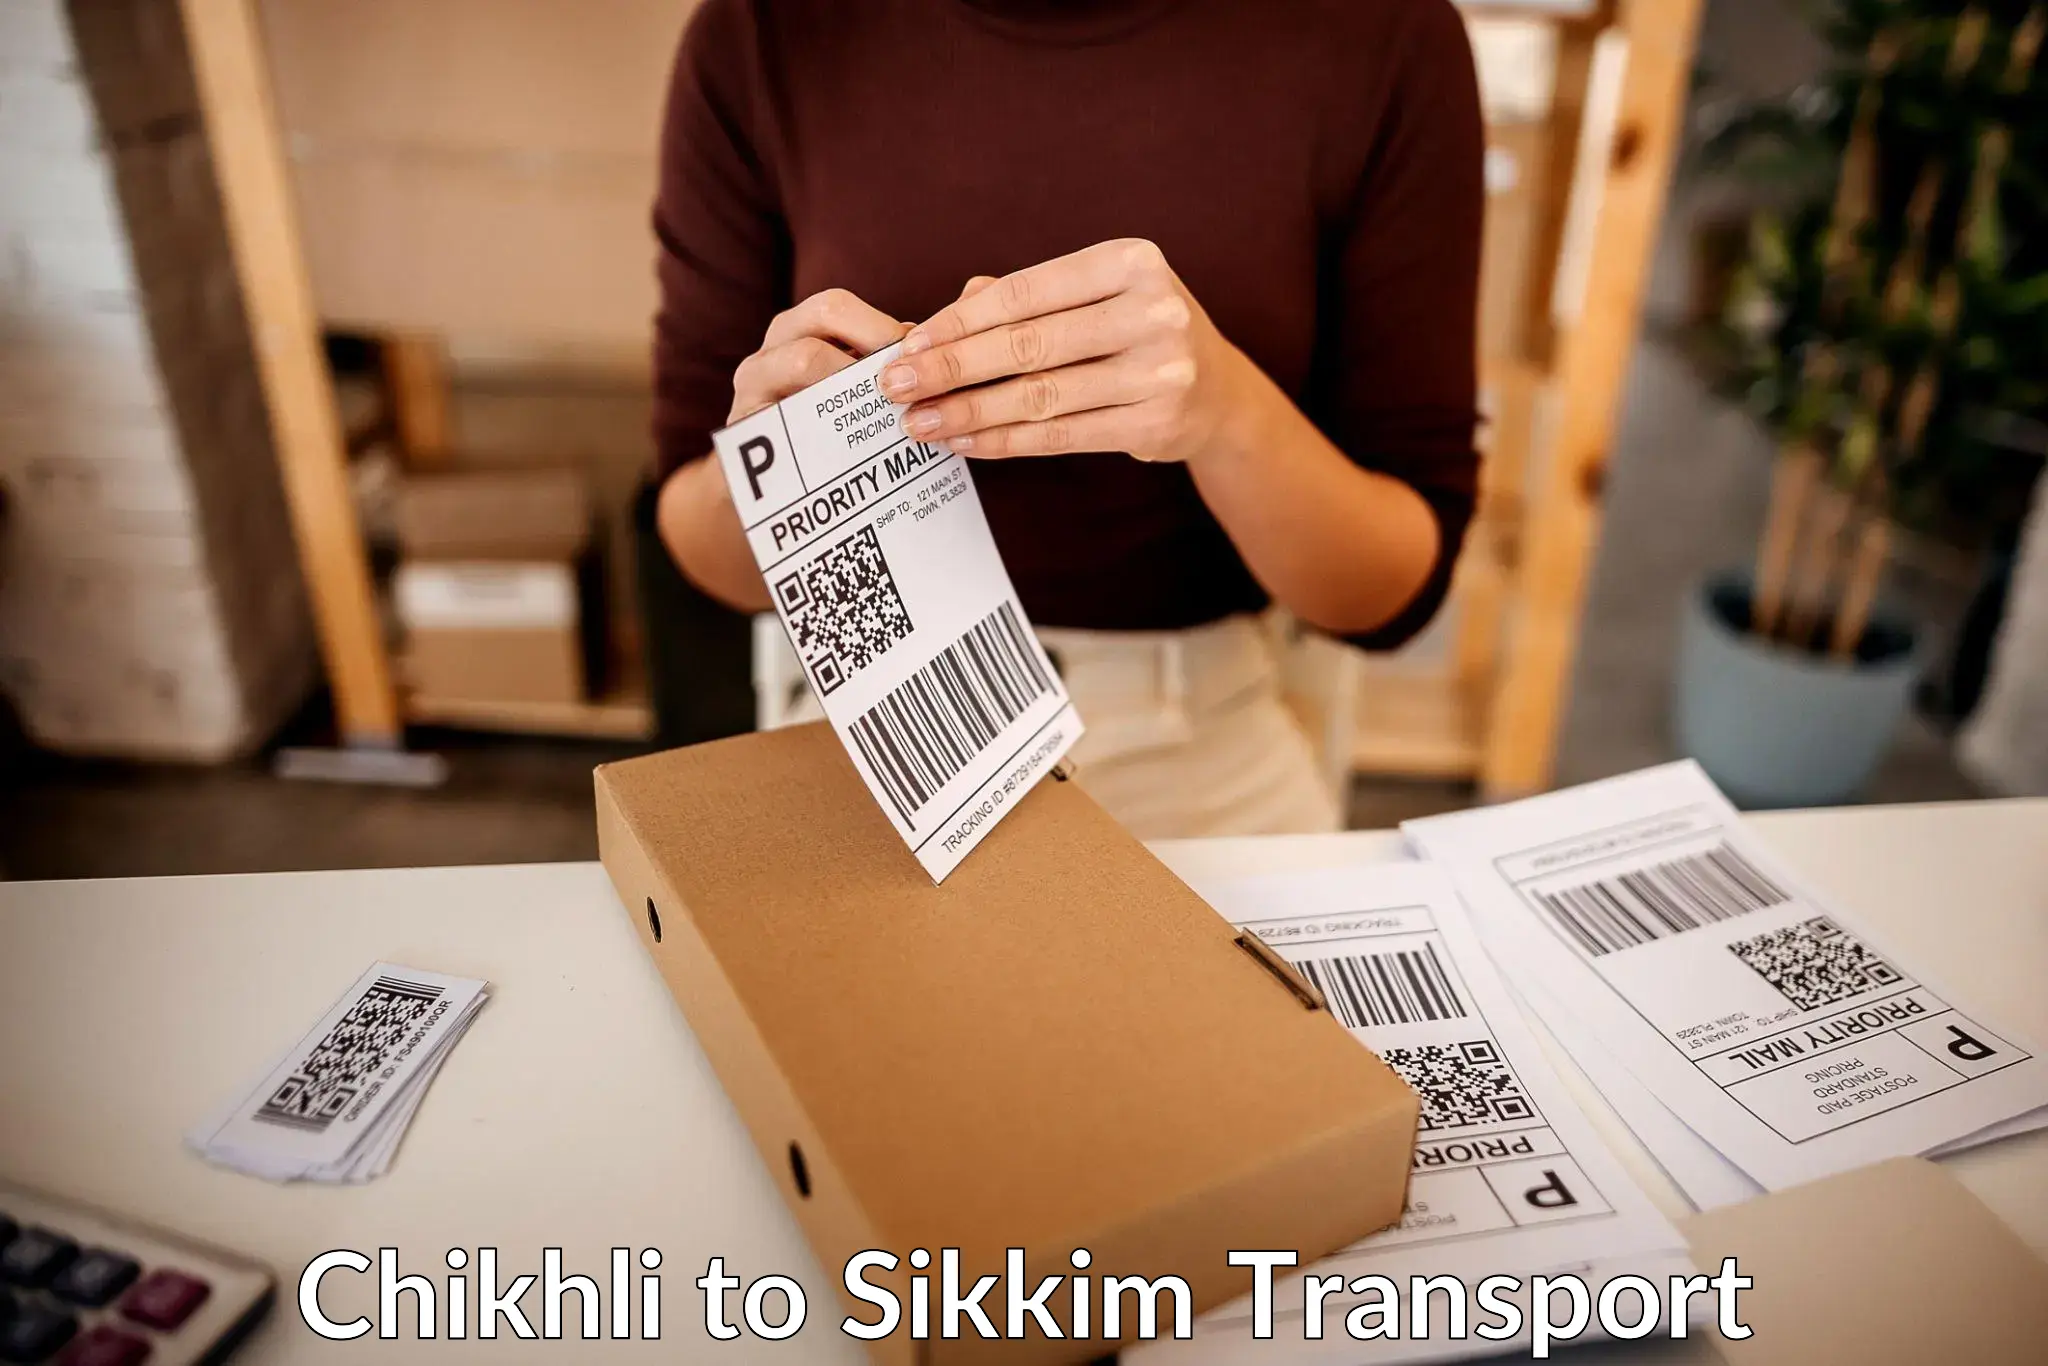 Express transport services Chikhli to Sikkim